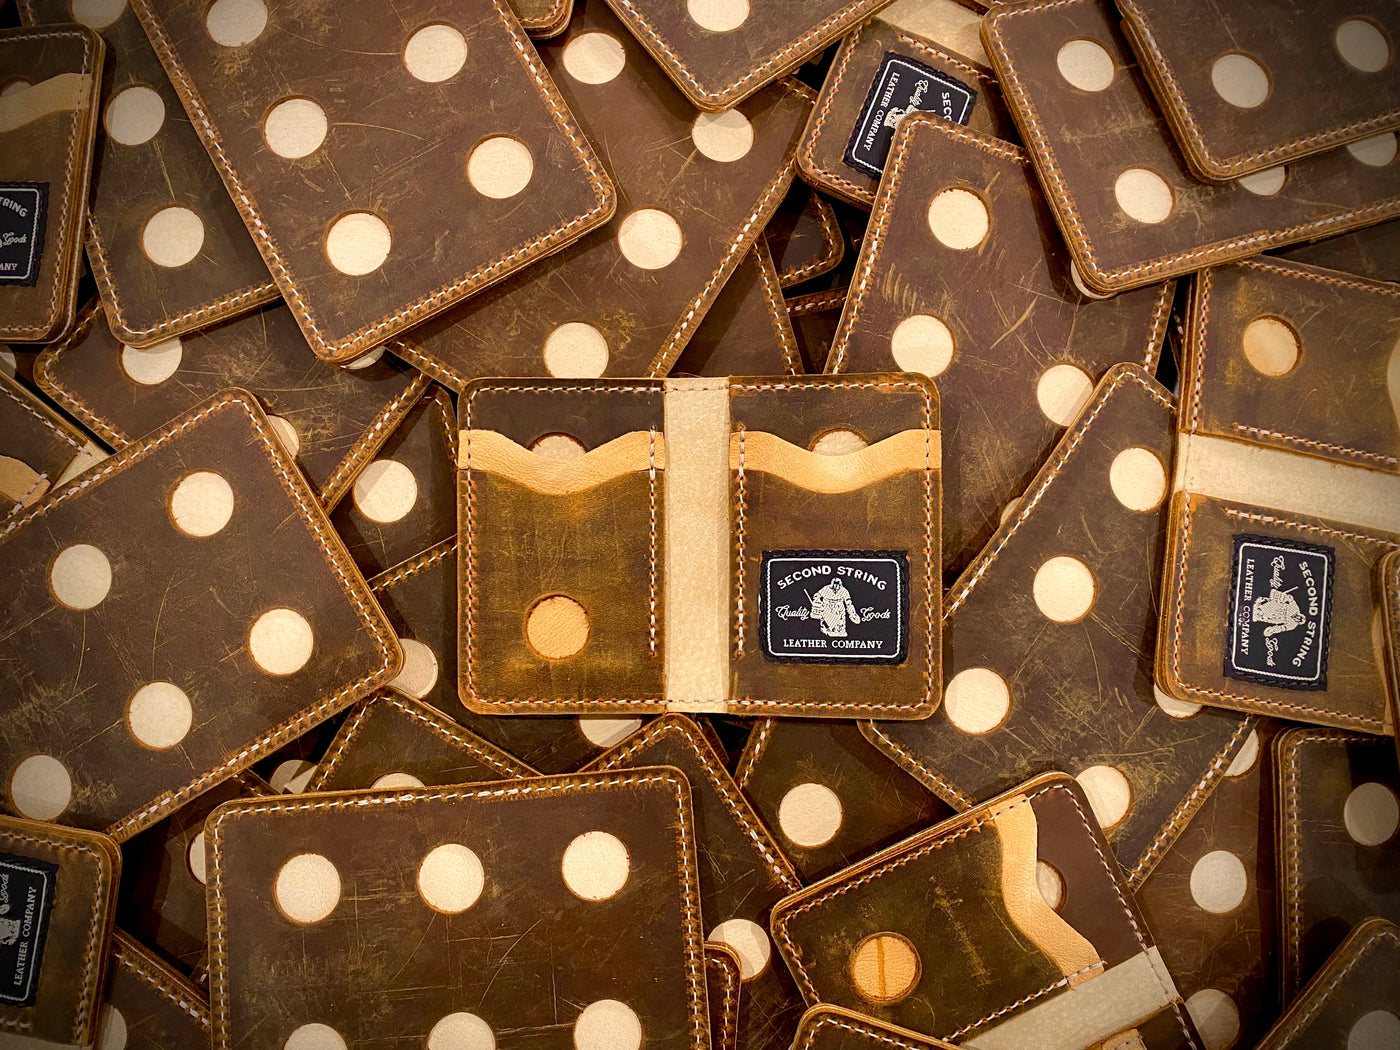 Waffle Board Wallets – Second String Leather Company